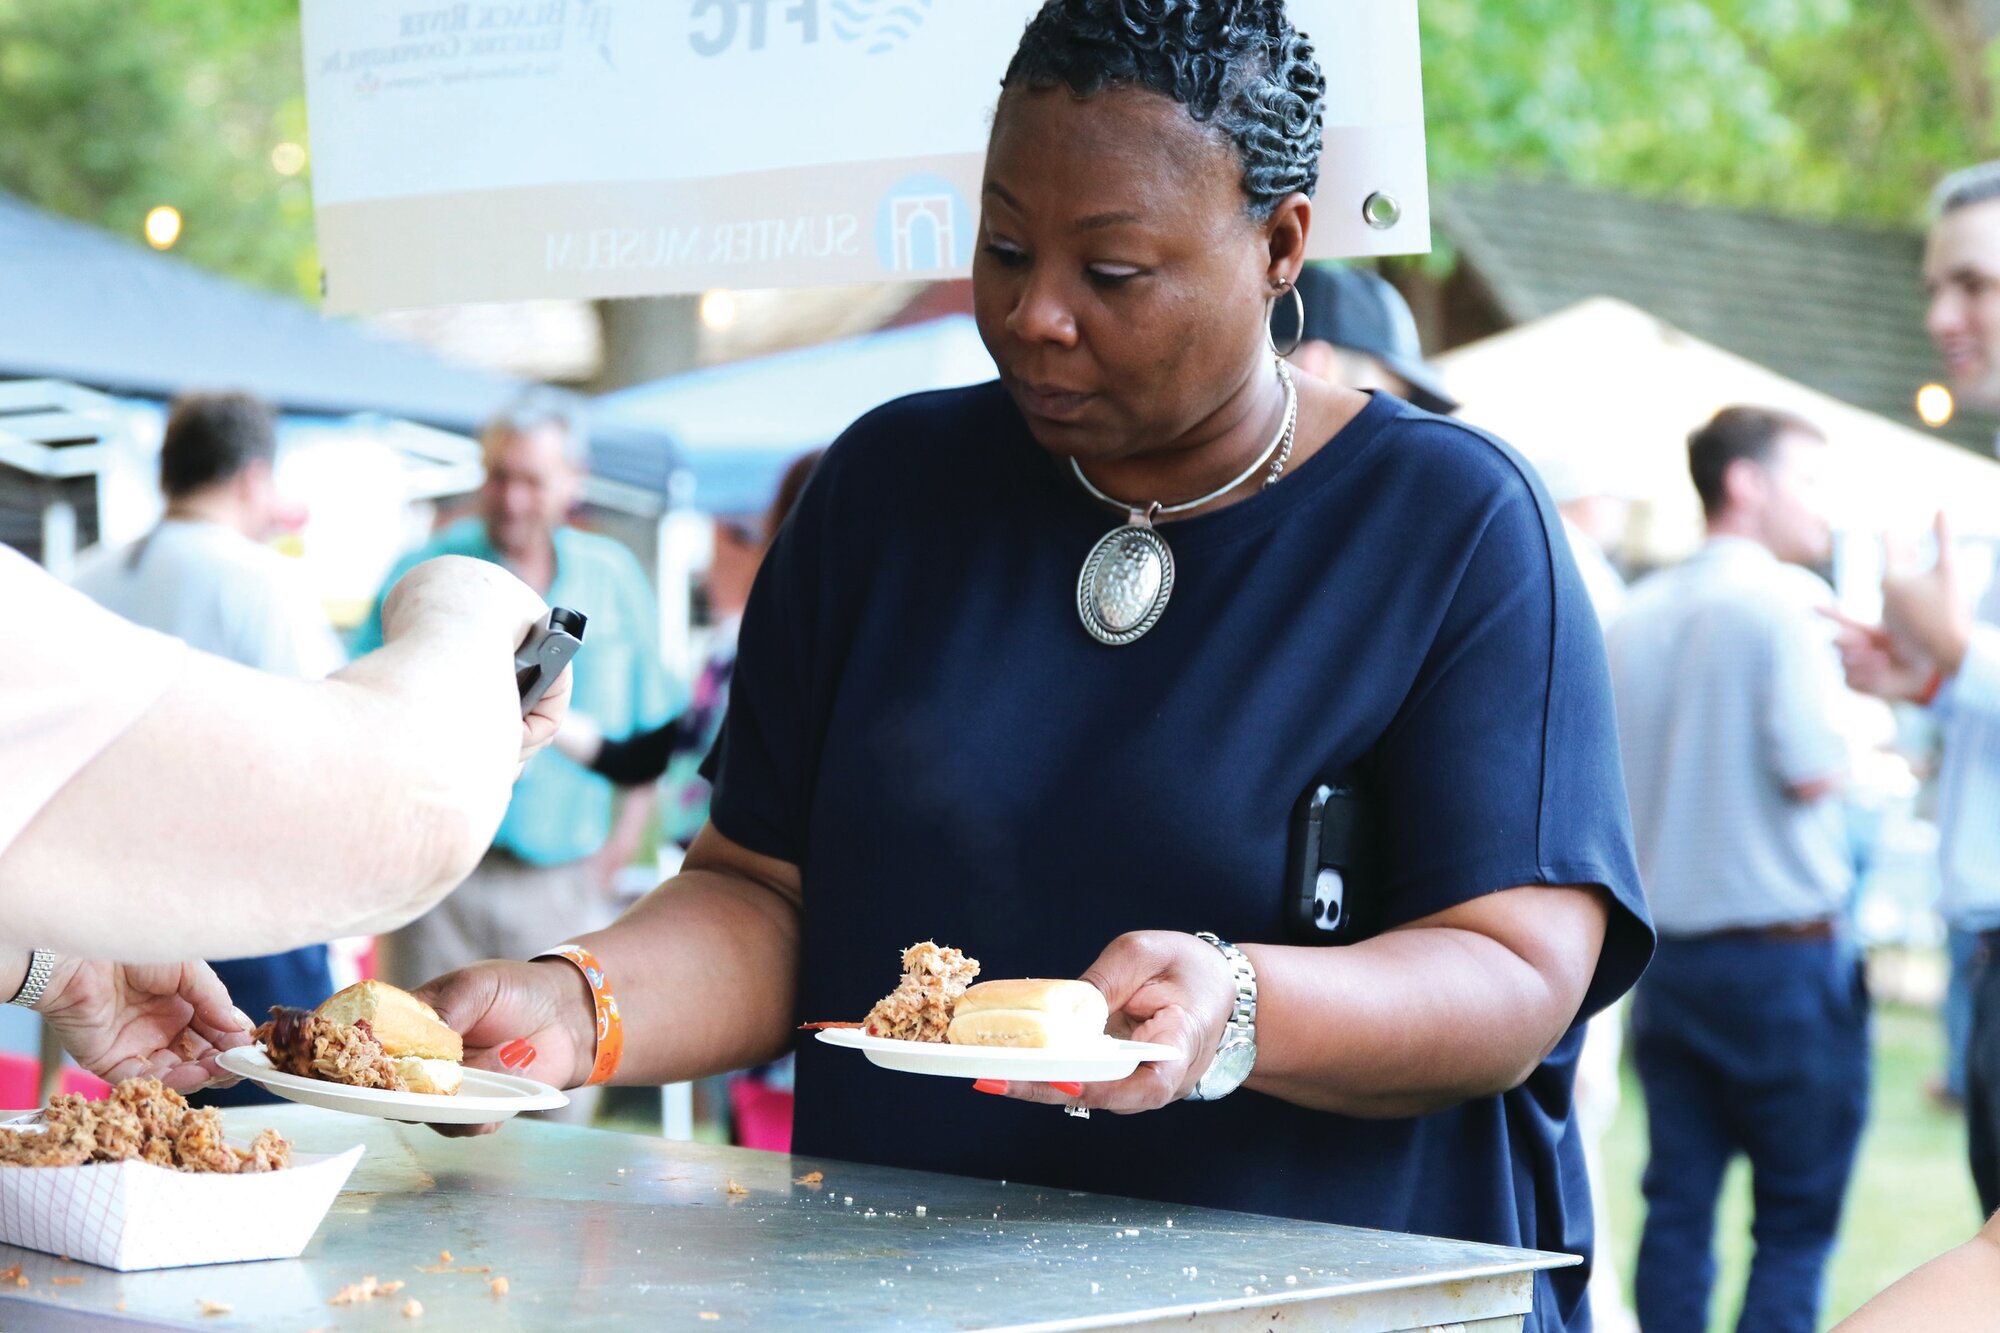 Nearly 500 Sumterites attend the 22nd-annual Shrimp Feast on April 25, indulging in six to eight different variations of shrimp and delicious barbecue on the Sumter Museum's lawn.